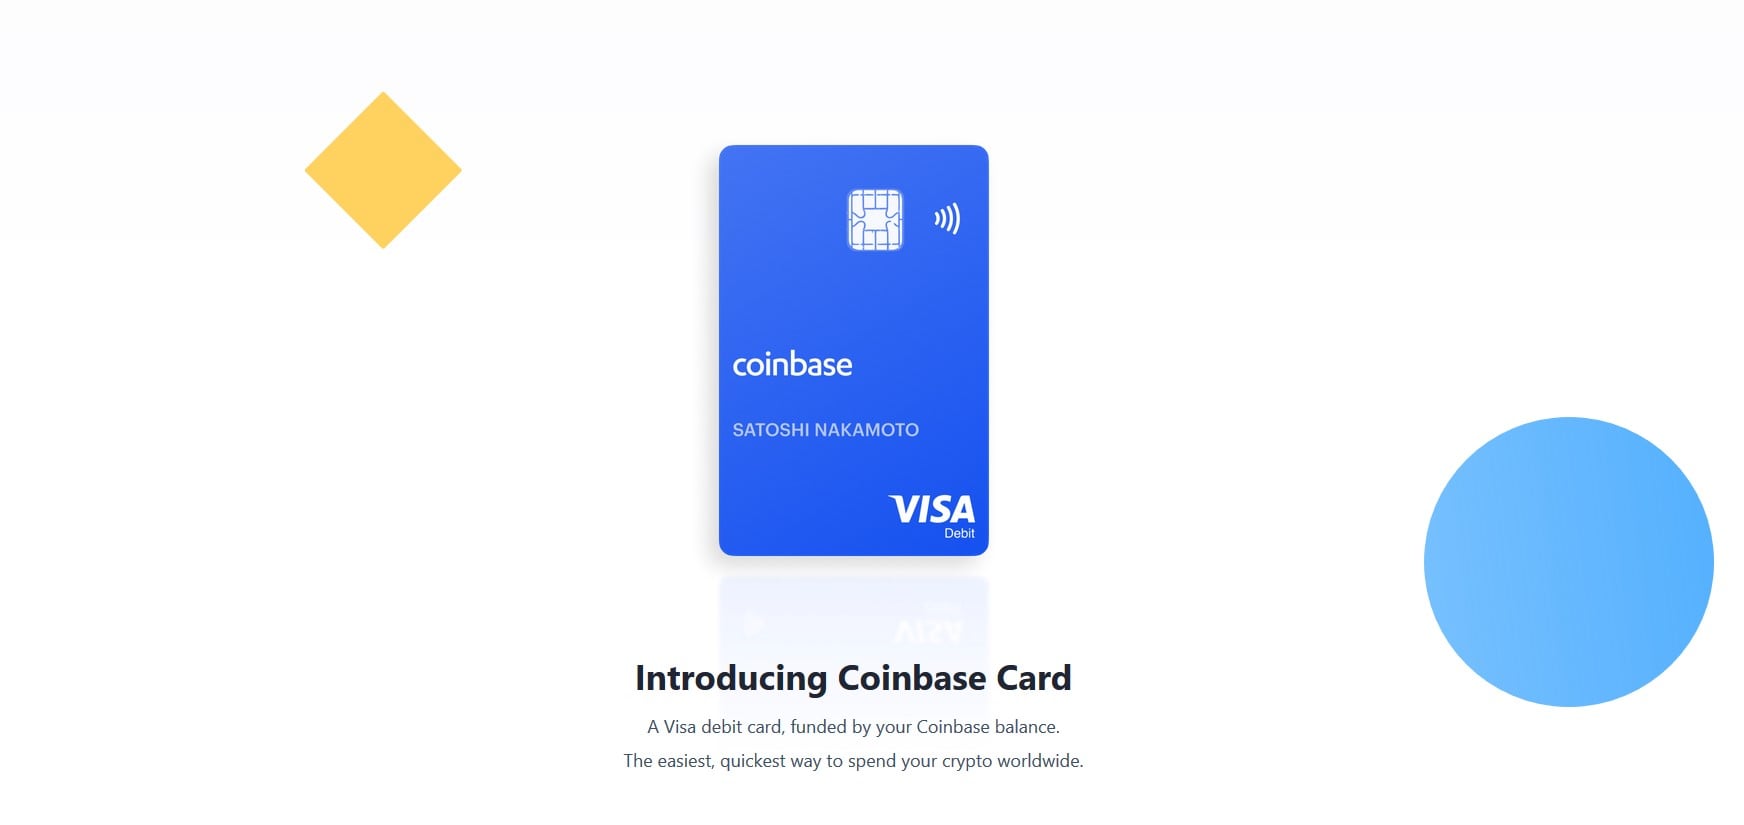 Is Coinbase Stopping Card Purchases In The Uk? : Coinbase ...